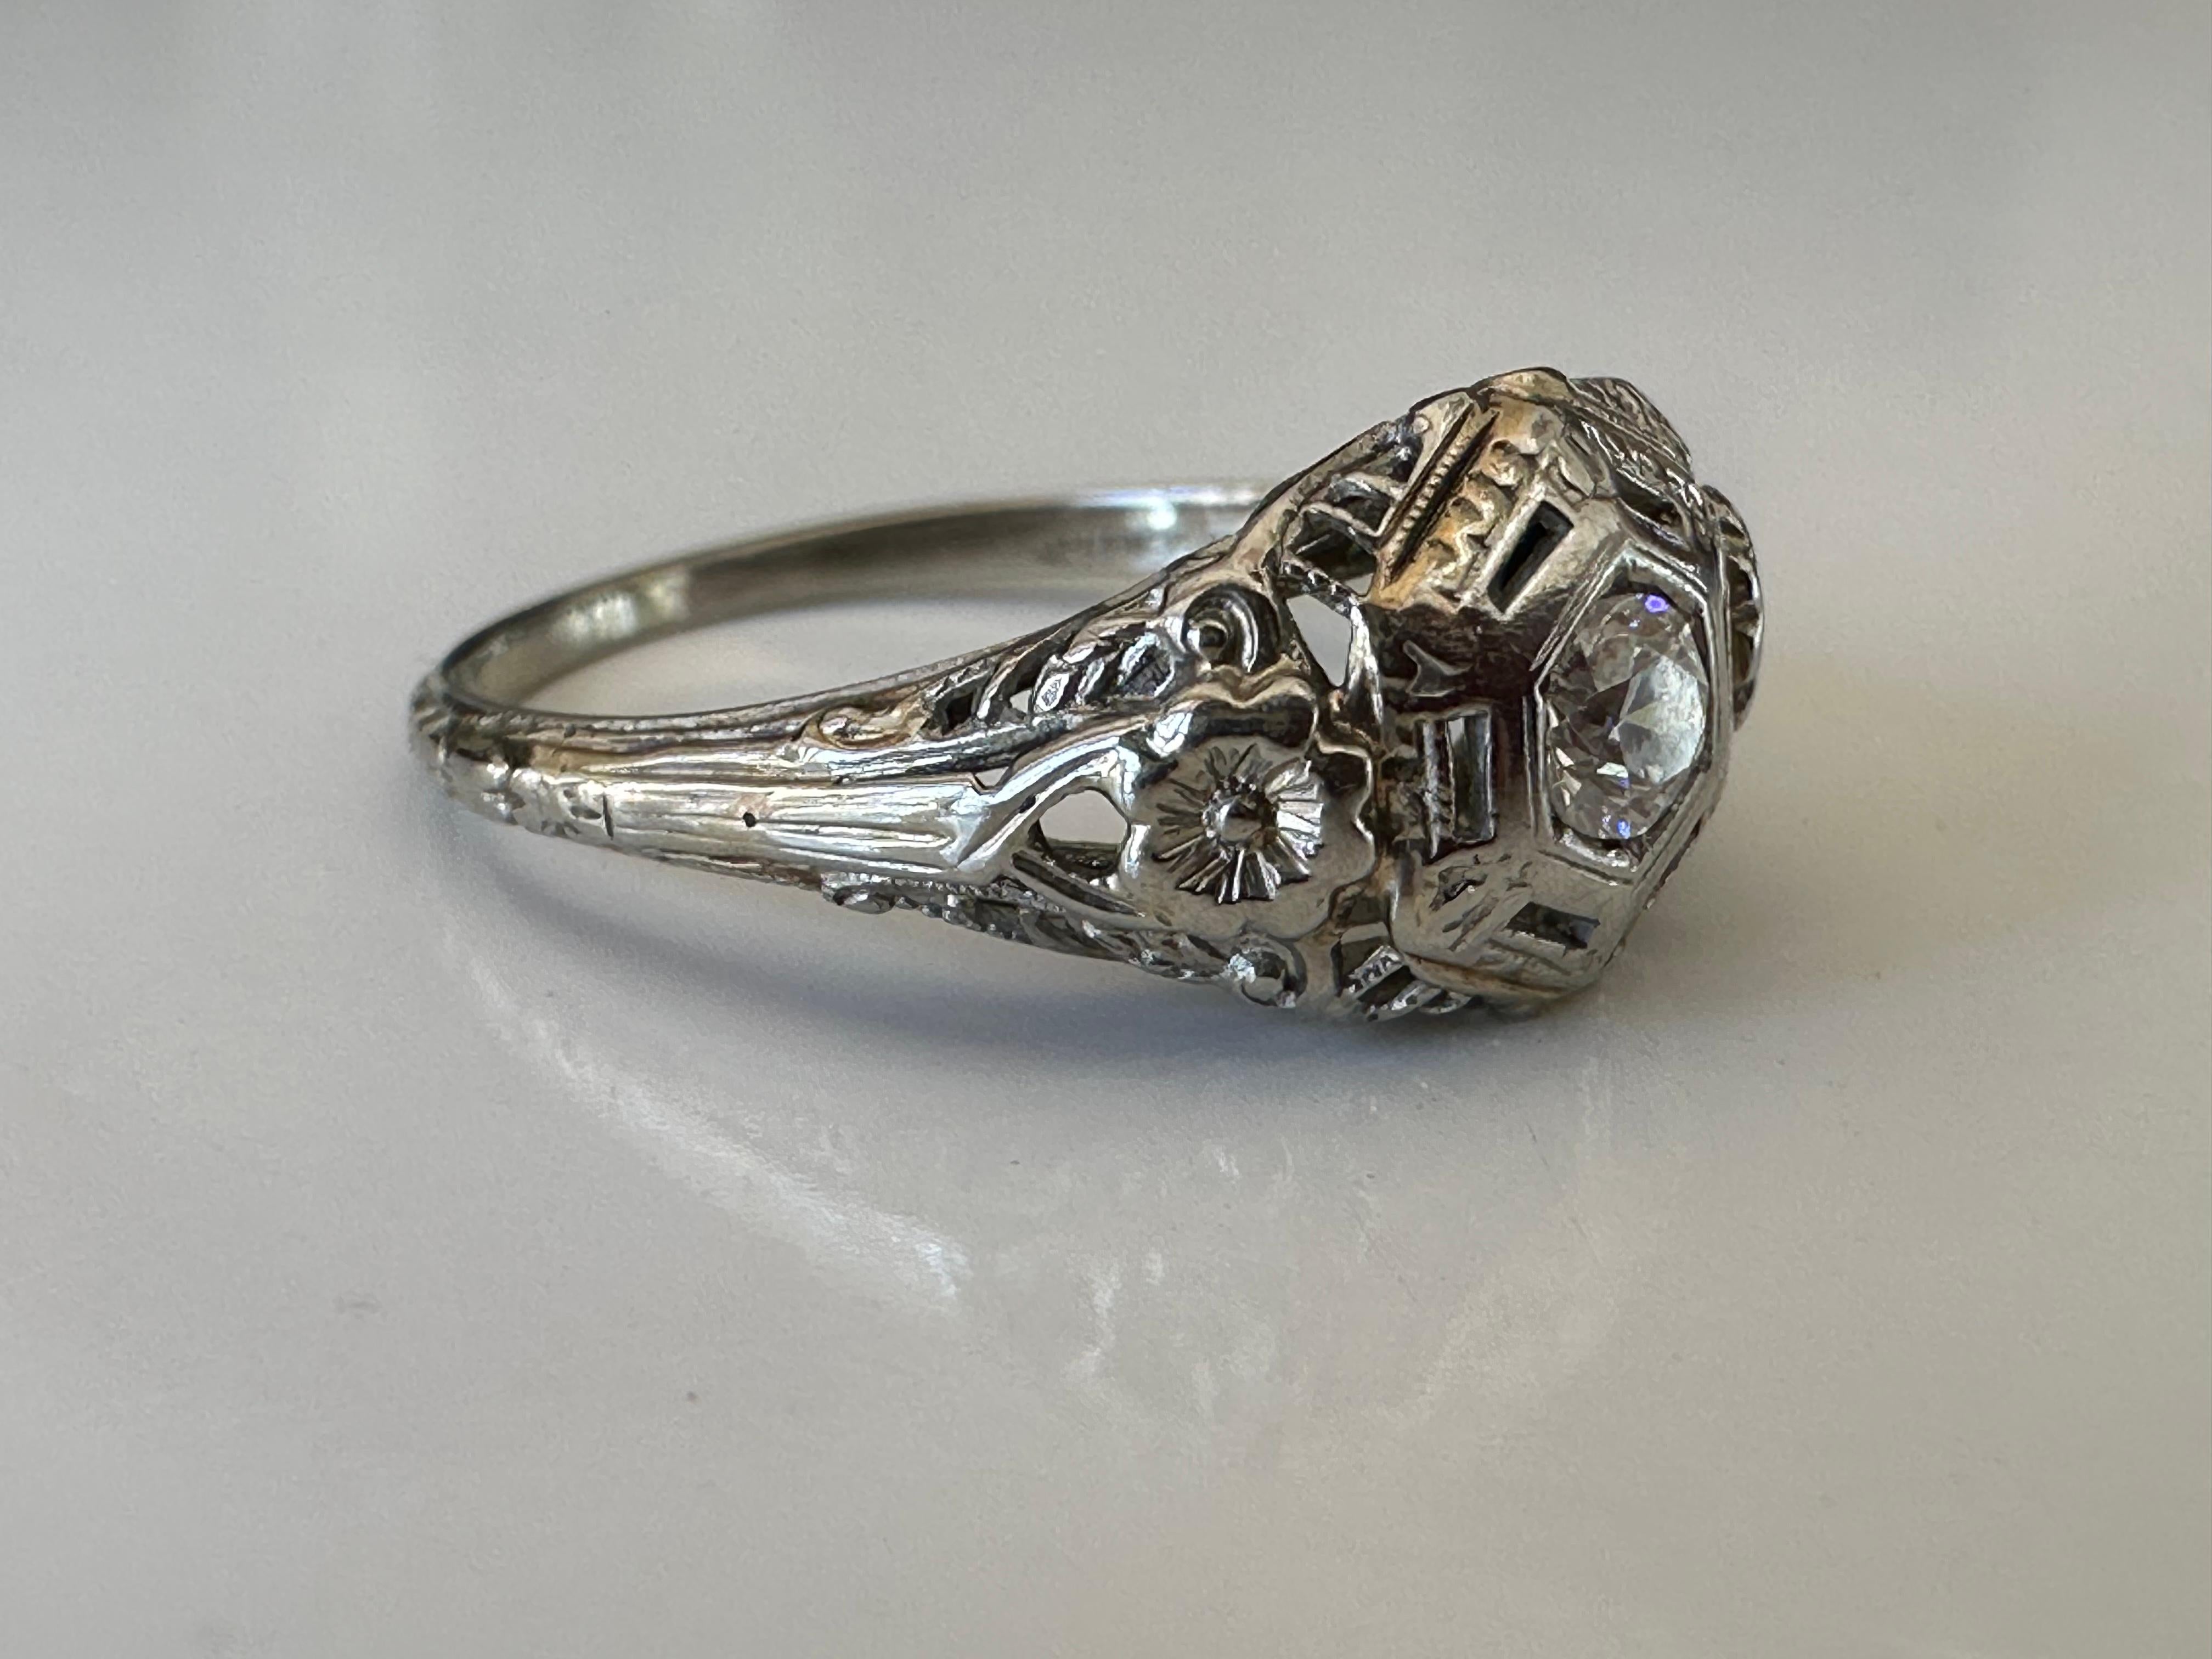 Edwardian Era Diamond Solitaire and Filigree Ring For Sale 1